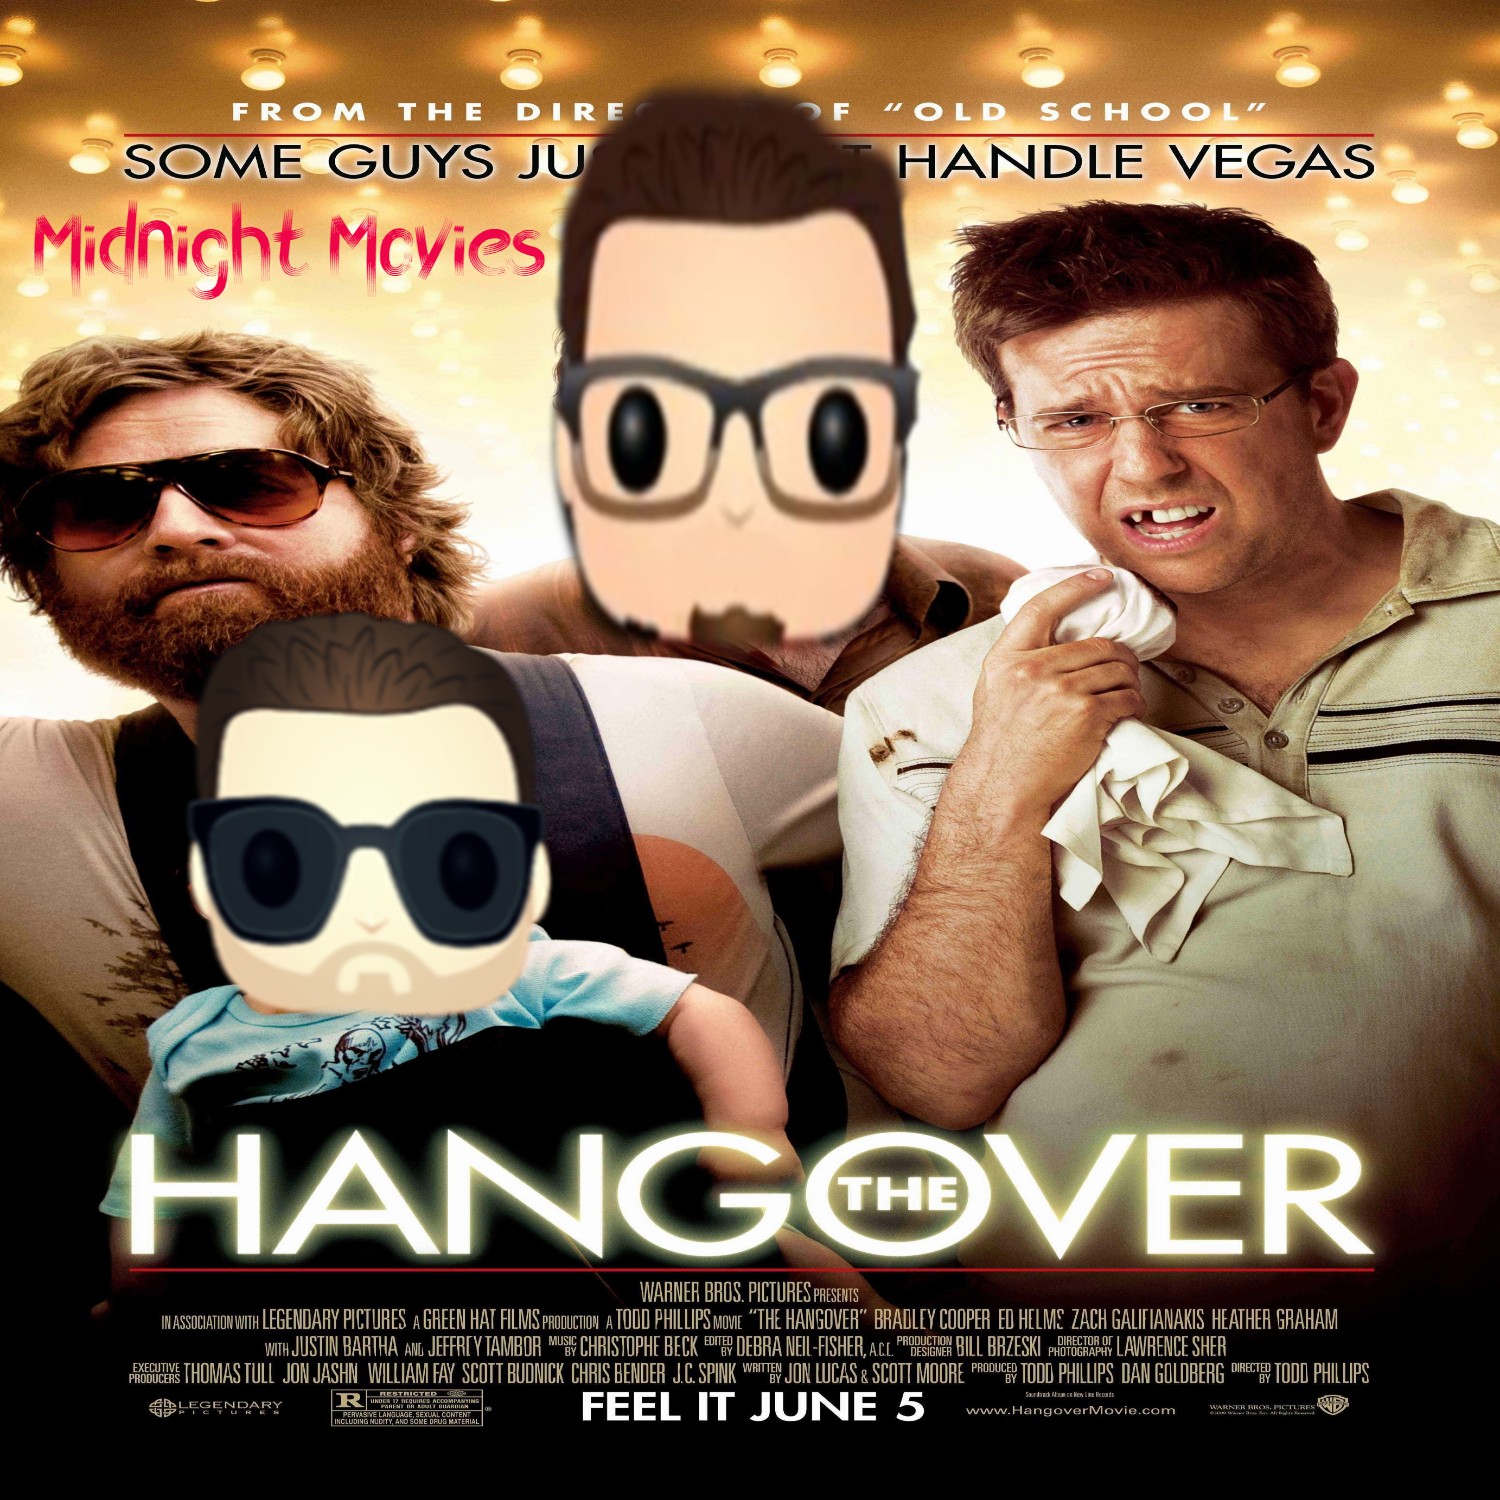 The Hangover Review